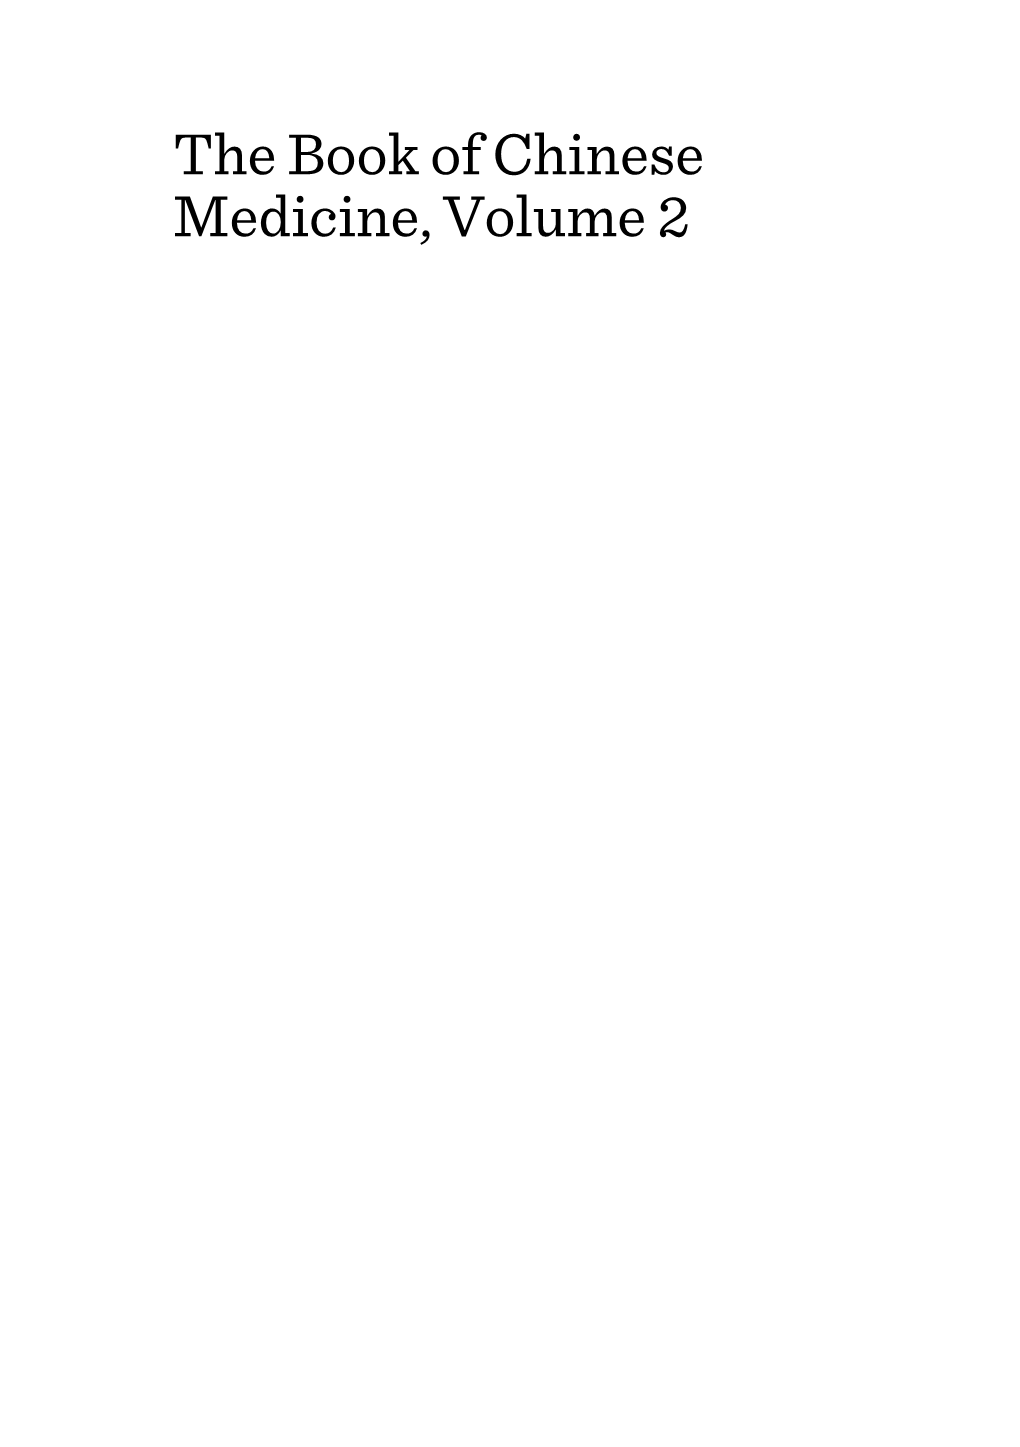 The Book of Chinese Medicine, Volume 2